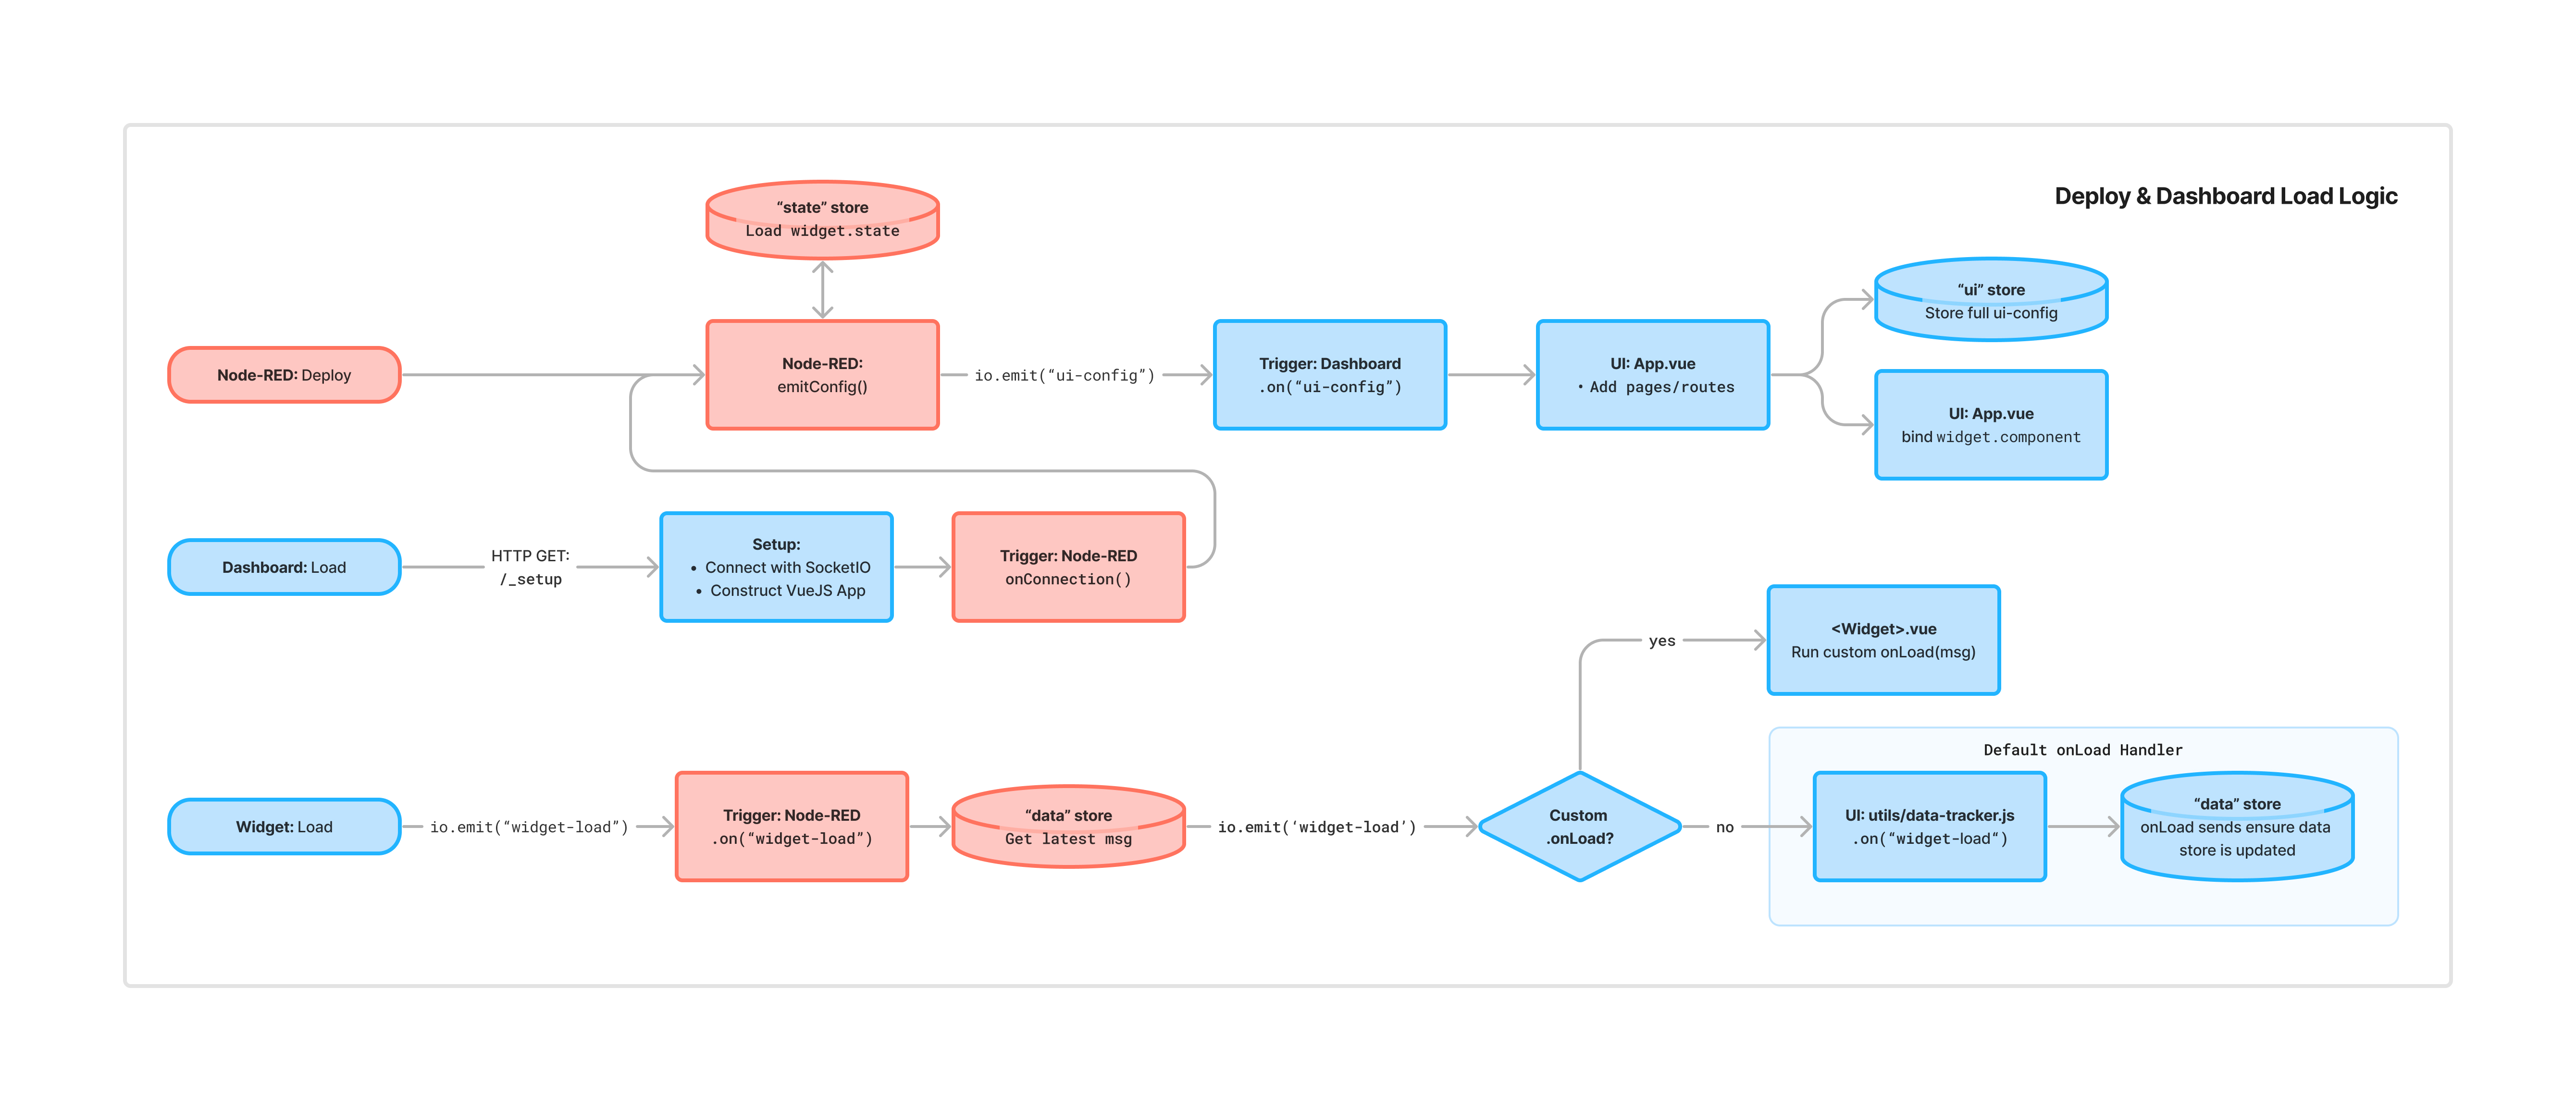 A flow diagram depicting how events traverse between Node-RED (red) and the Dashboard (blue) at deploy and first-load